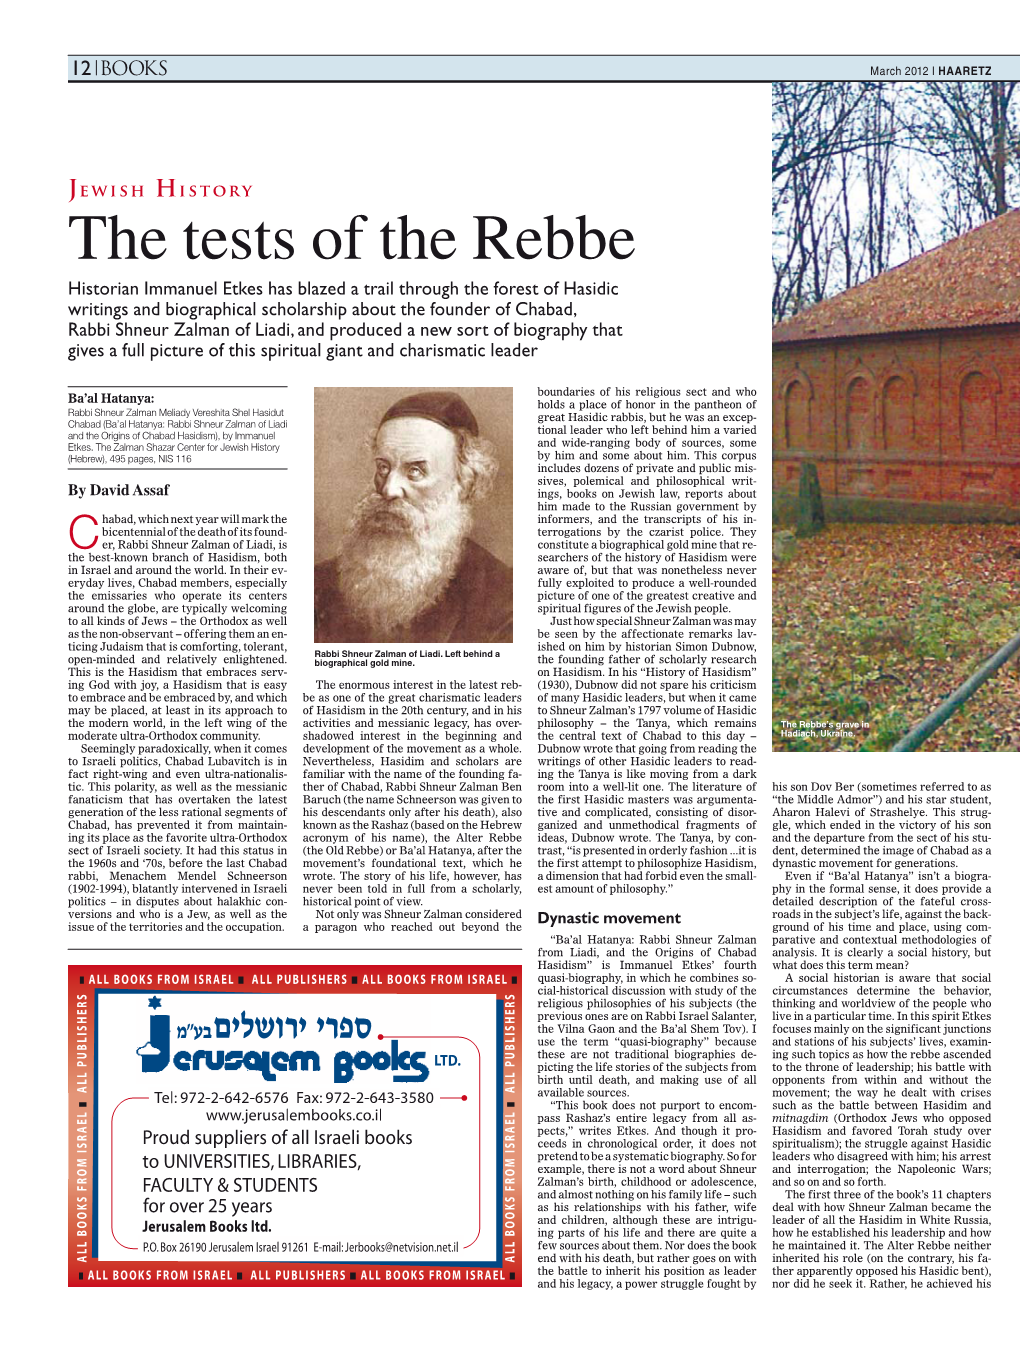 The Tests of the Rebbe